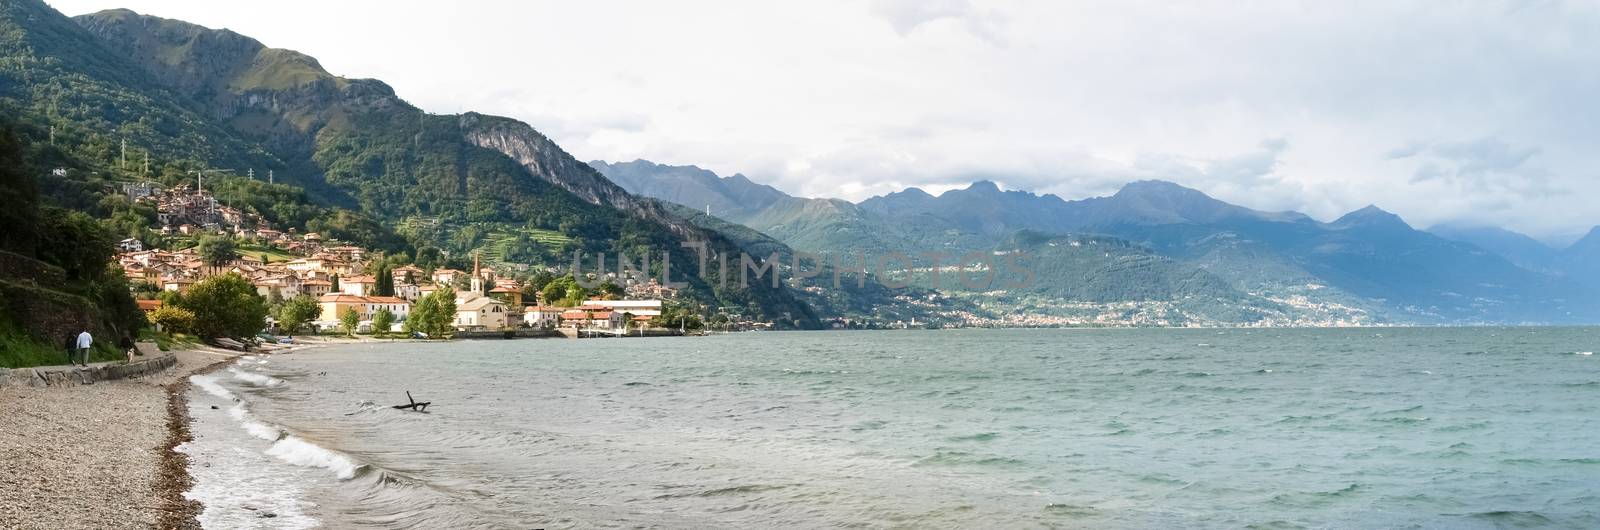 Pianello del Lario, Italy - september 5, 2015: afternoon Panorama of the country overlooking Lake Como and frame the surrounding mountains.